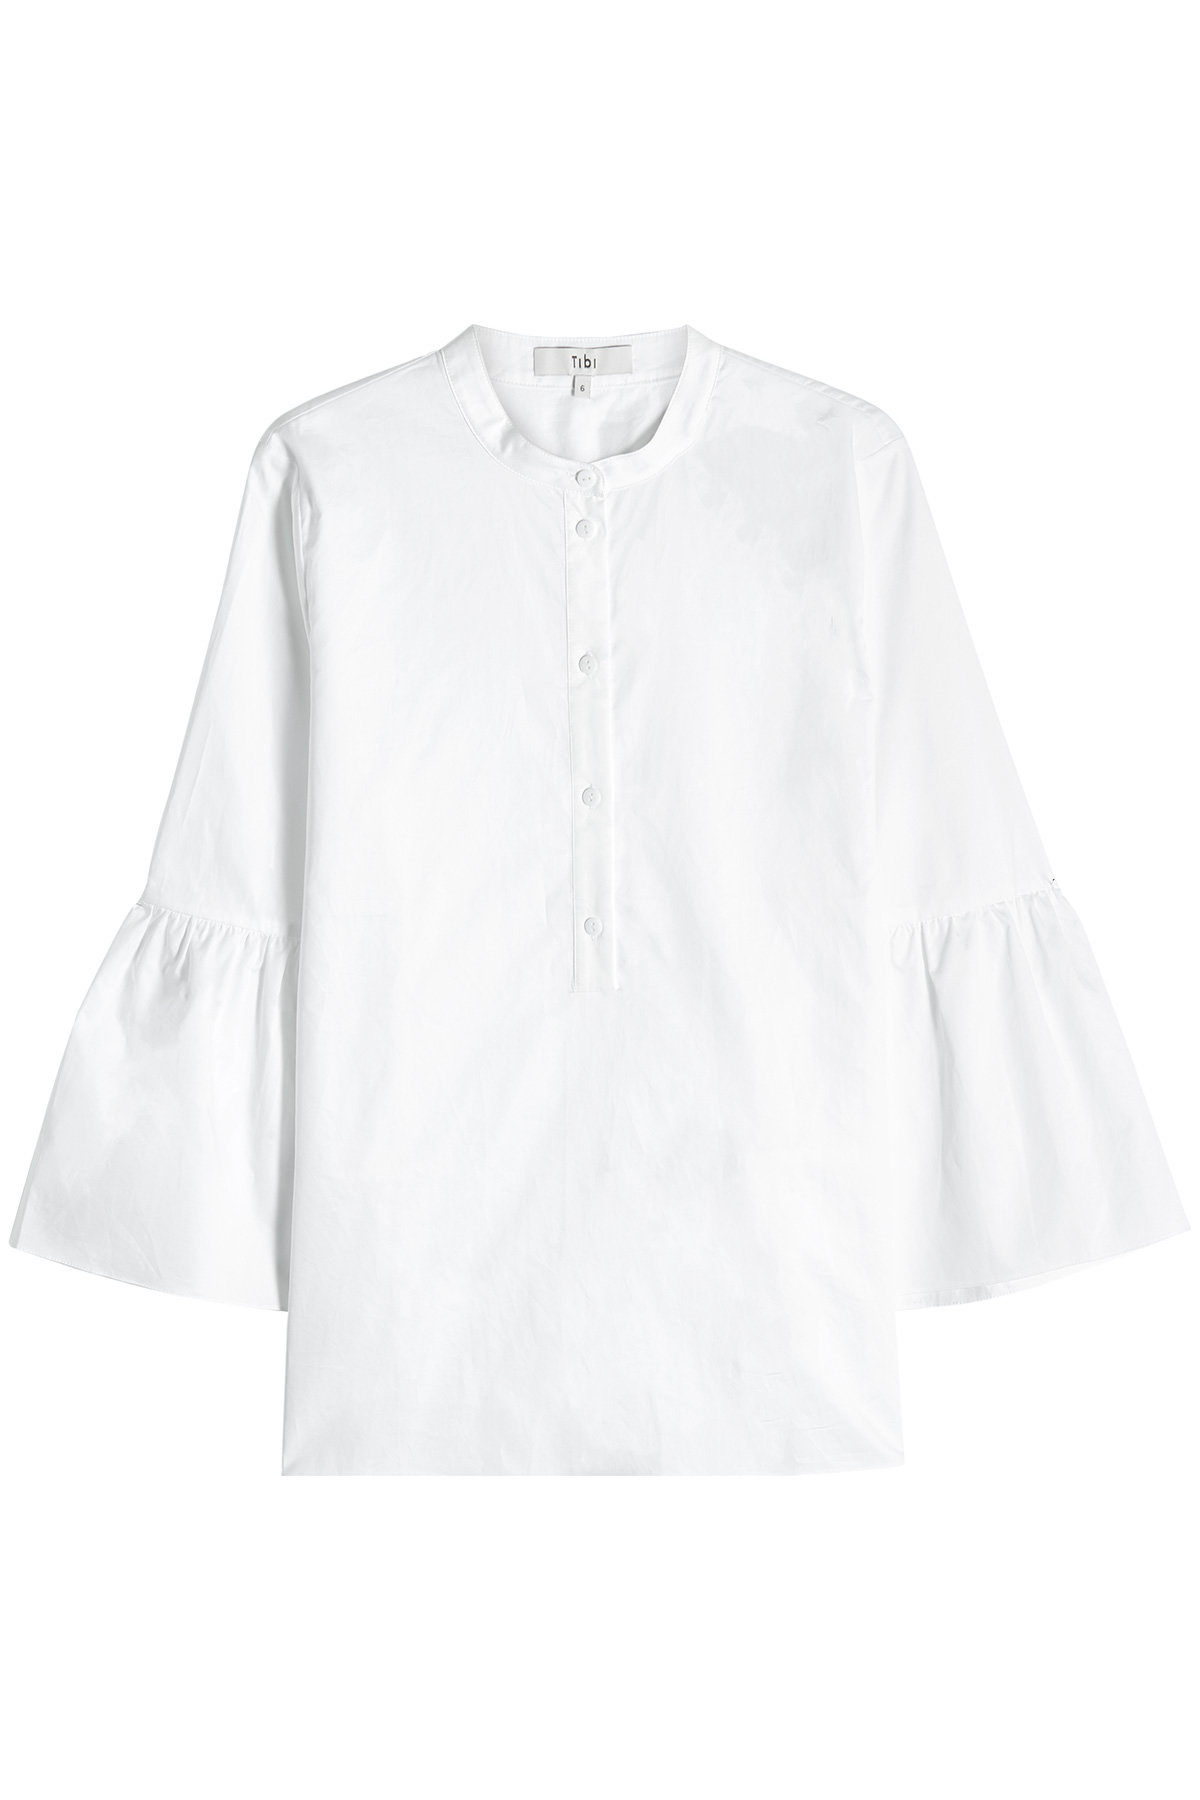 Tibi - Cotton Shirt with Bell Sleeves